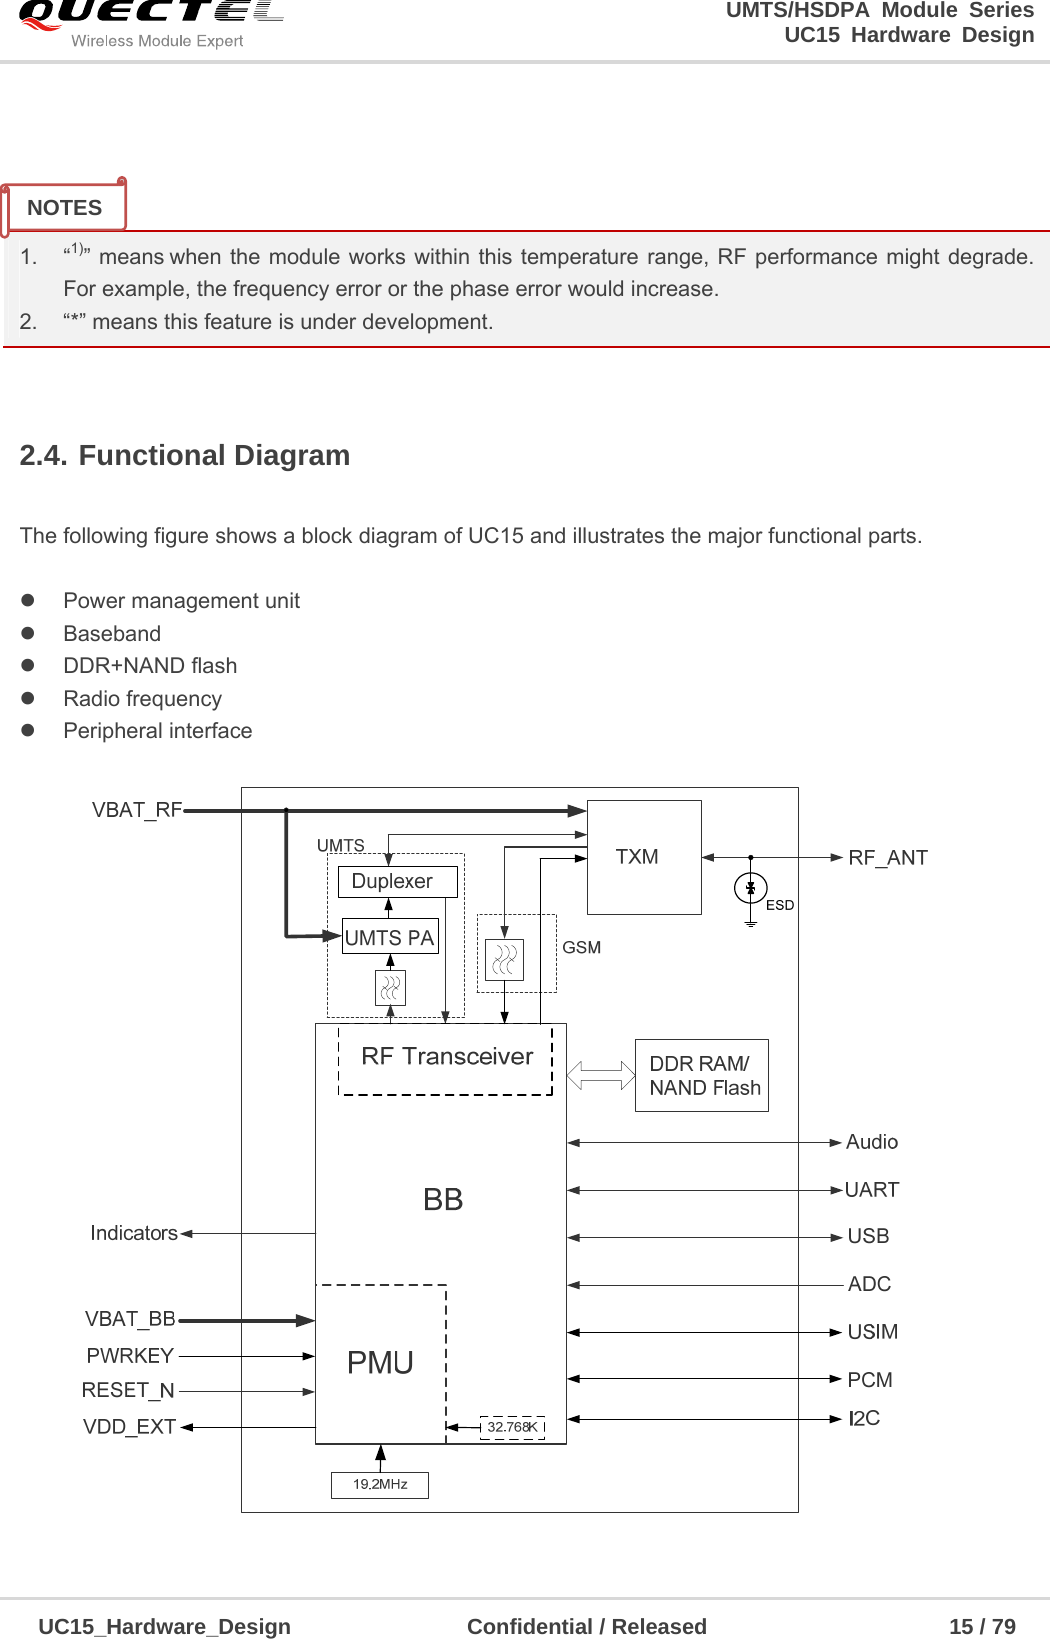                                                                        UMTS/HSDPA Module Series                                                                 UC15 Hardware Design  UC15_Hardware_Design                Confidential / Released                      15 / 79       1. “1)” means when the module works within this temperature range, RF performance might degrade. For example, the frequency error or the phase error would increase. 2.  “*” means this feature is under development.  2.4. Functional Diagram   The following figure shows a block diagram of UC15 and illustrates the major functional parts.      Power management unit  Baseband  DDR+NAND flash  Radio frequency   Peripheral interface  NOTES 